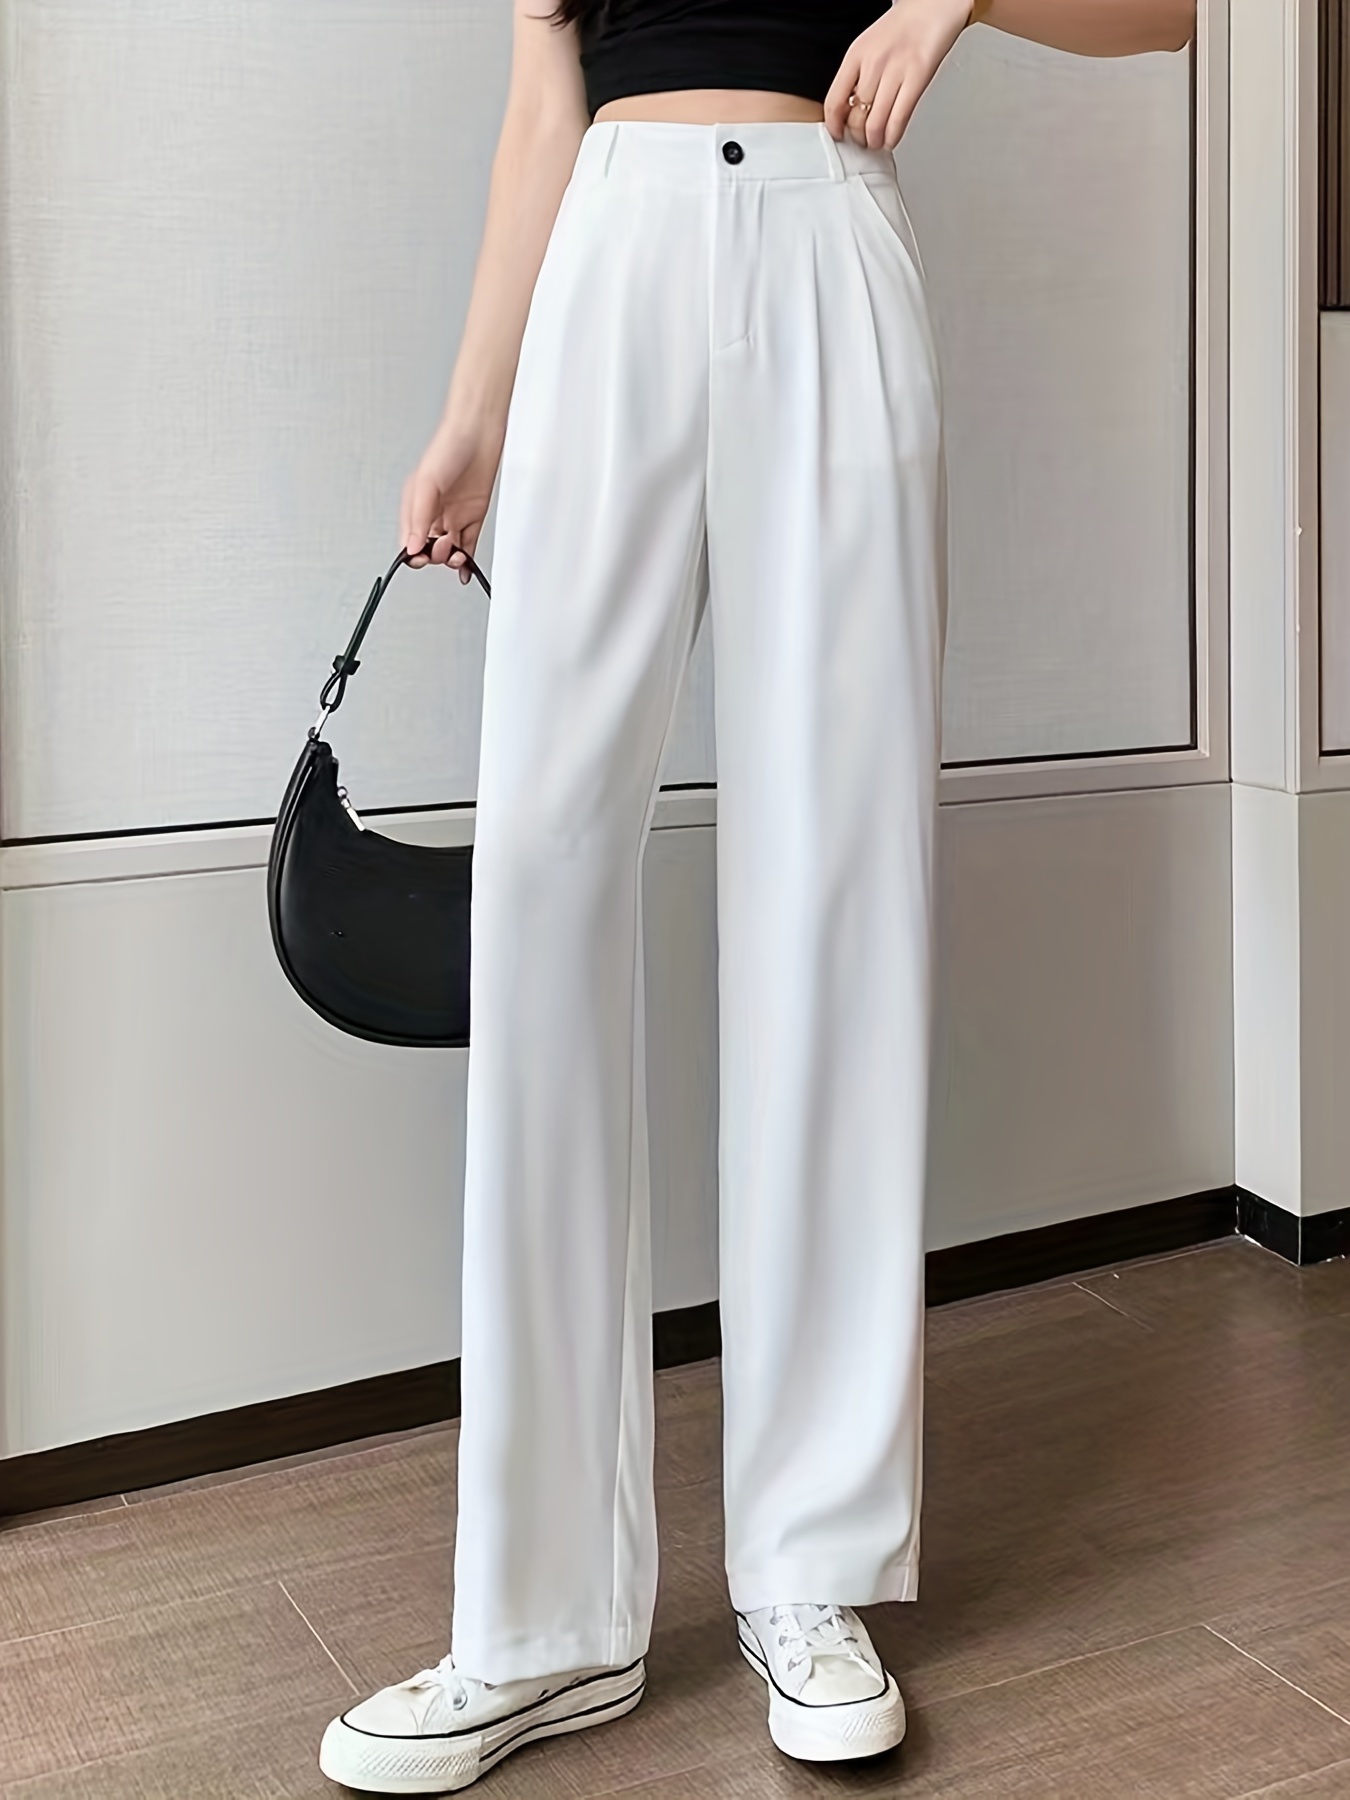 New Women Casual Loose High Waist Wide Leg Pants Spring Summer Female  Floor-Length White Suits Pants Ladies Long Trousers